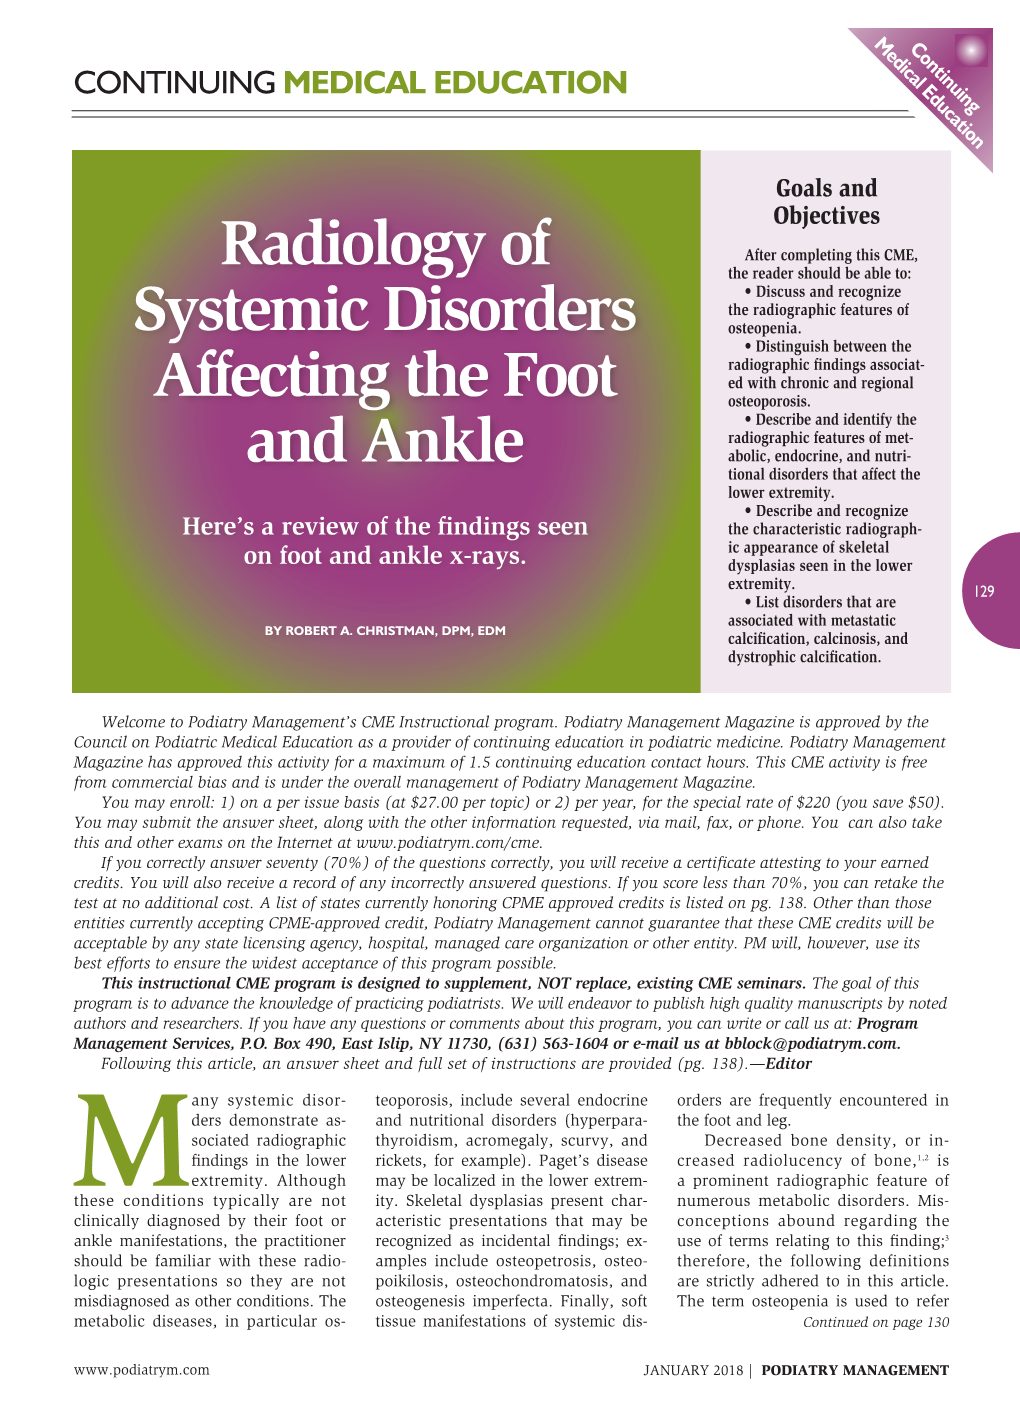 Radiology of Systemic Disorders Affecting the Foot and Ankle (Christman) Circle: 1